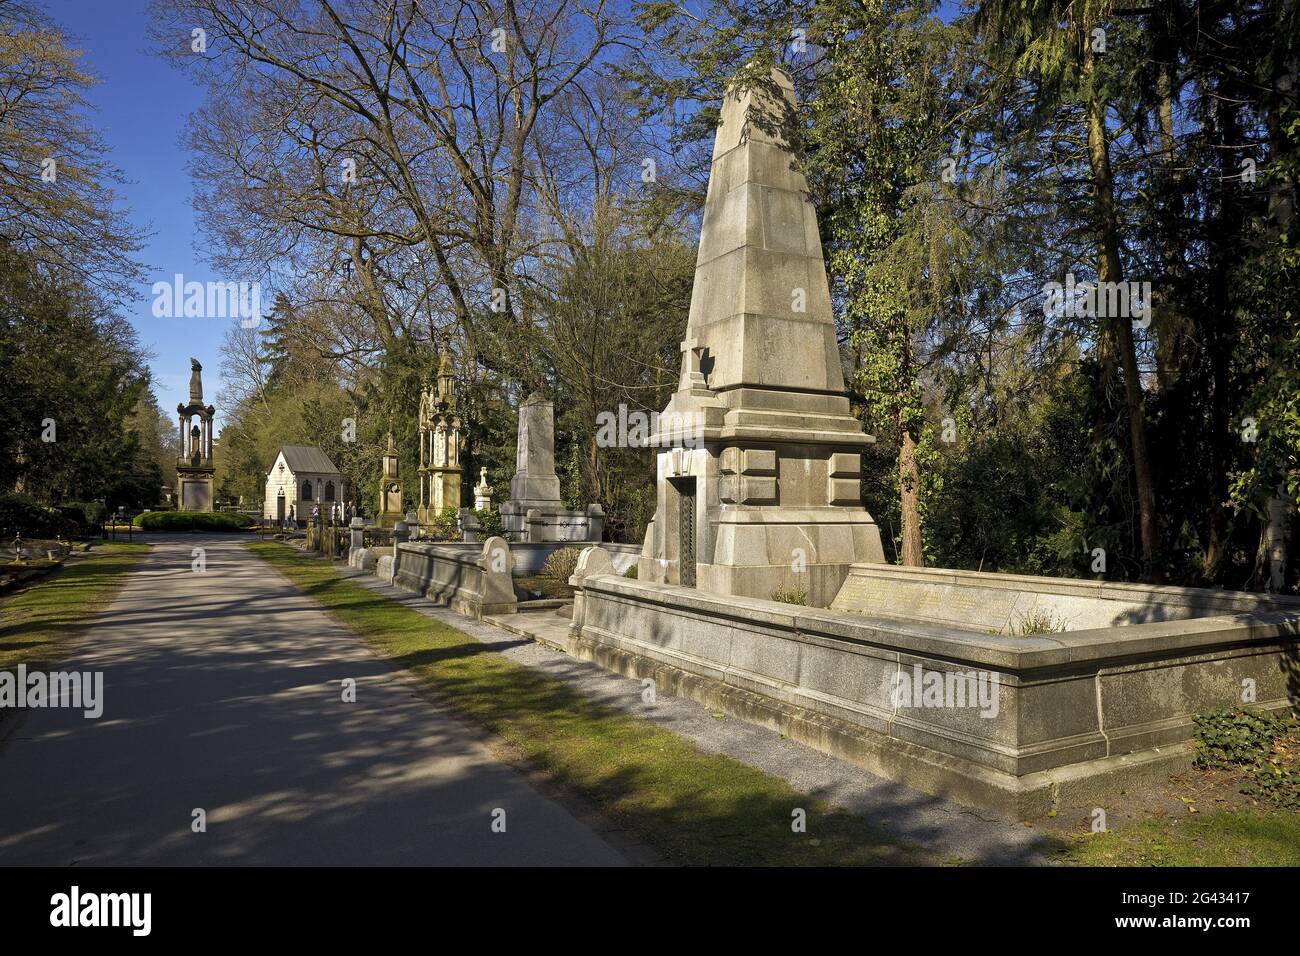 Melaten cemetery in spring, magnificent graves on the main path, Cologne, Germany, Europe Stock Photo